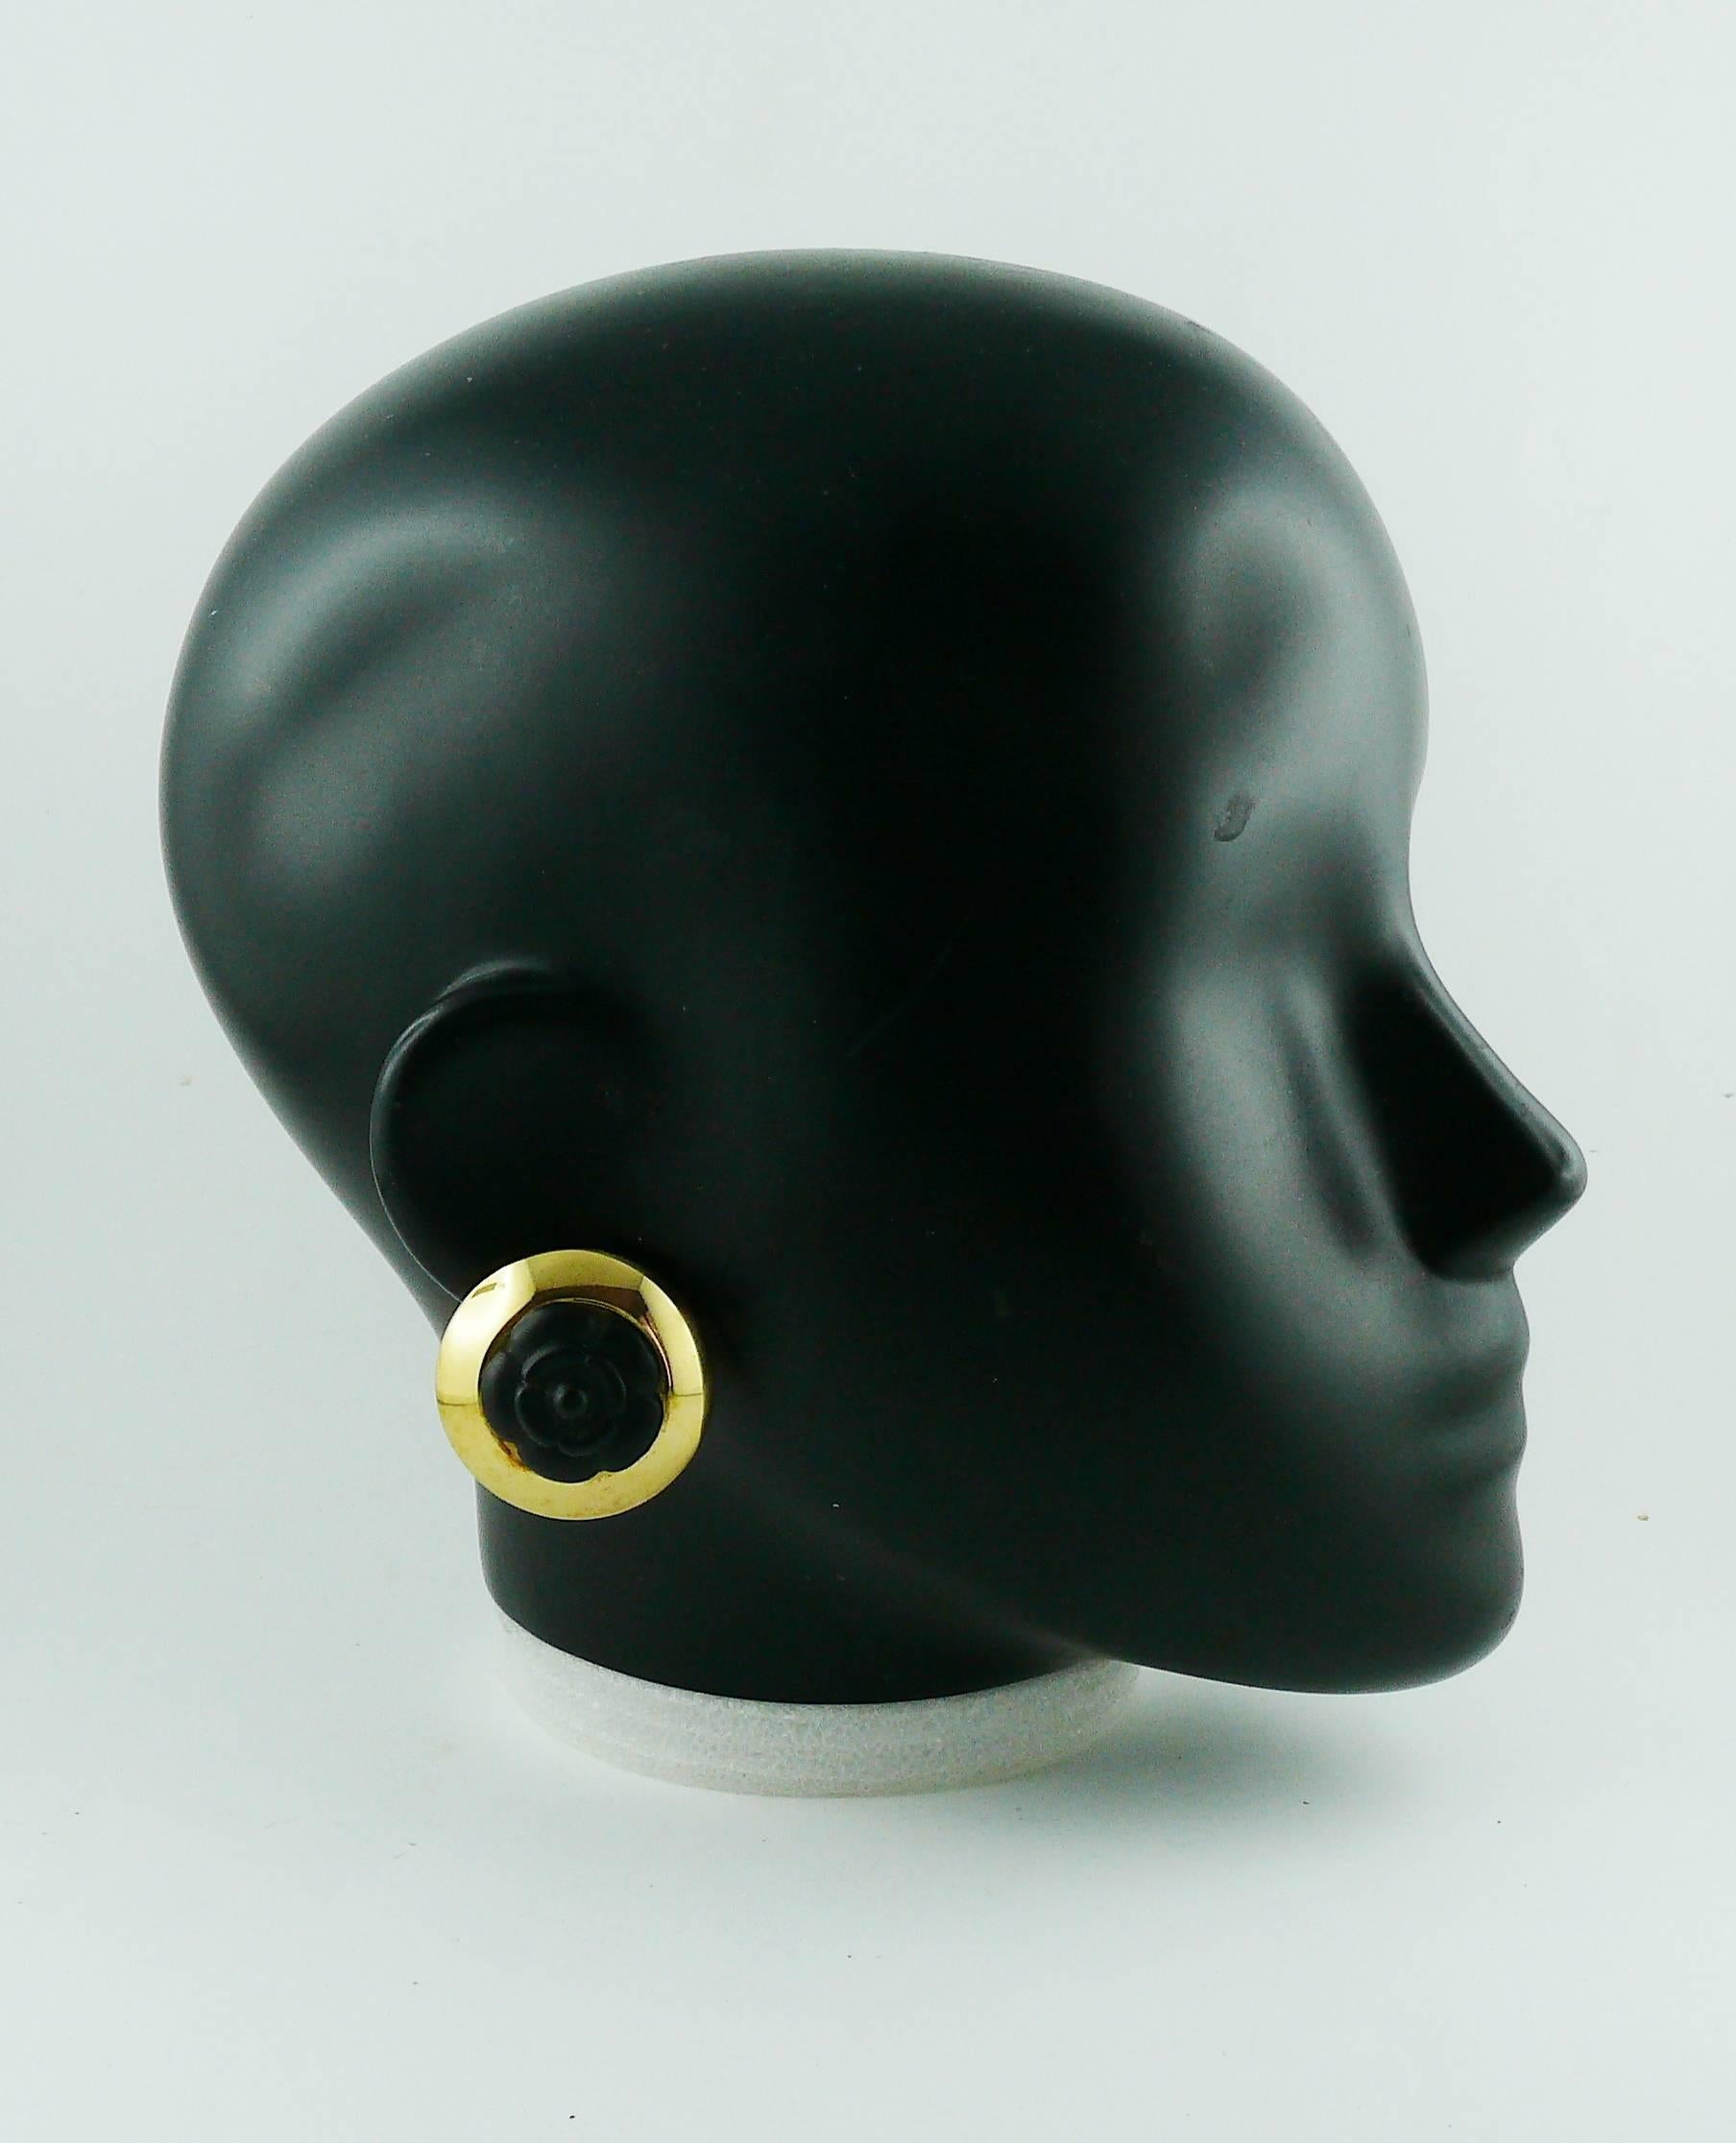 Chanel vintage 1992 domed gold tone clip-on earrings featuring a black resin camelia center.

Embossed CHANEL 2 7 Made in France.

Indicative measurements : diameter approx. 3.5 cm (1.38 inches).

JEWELRY CONDITION CHART
- New or never worn : item